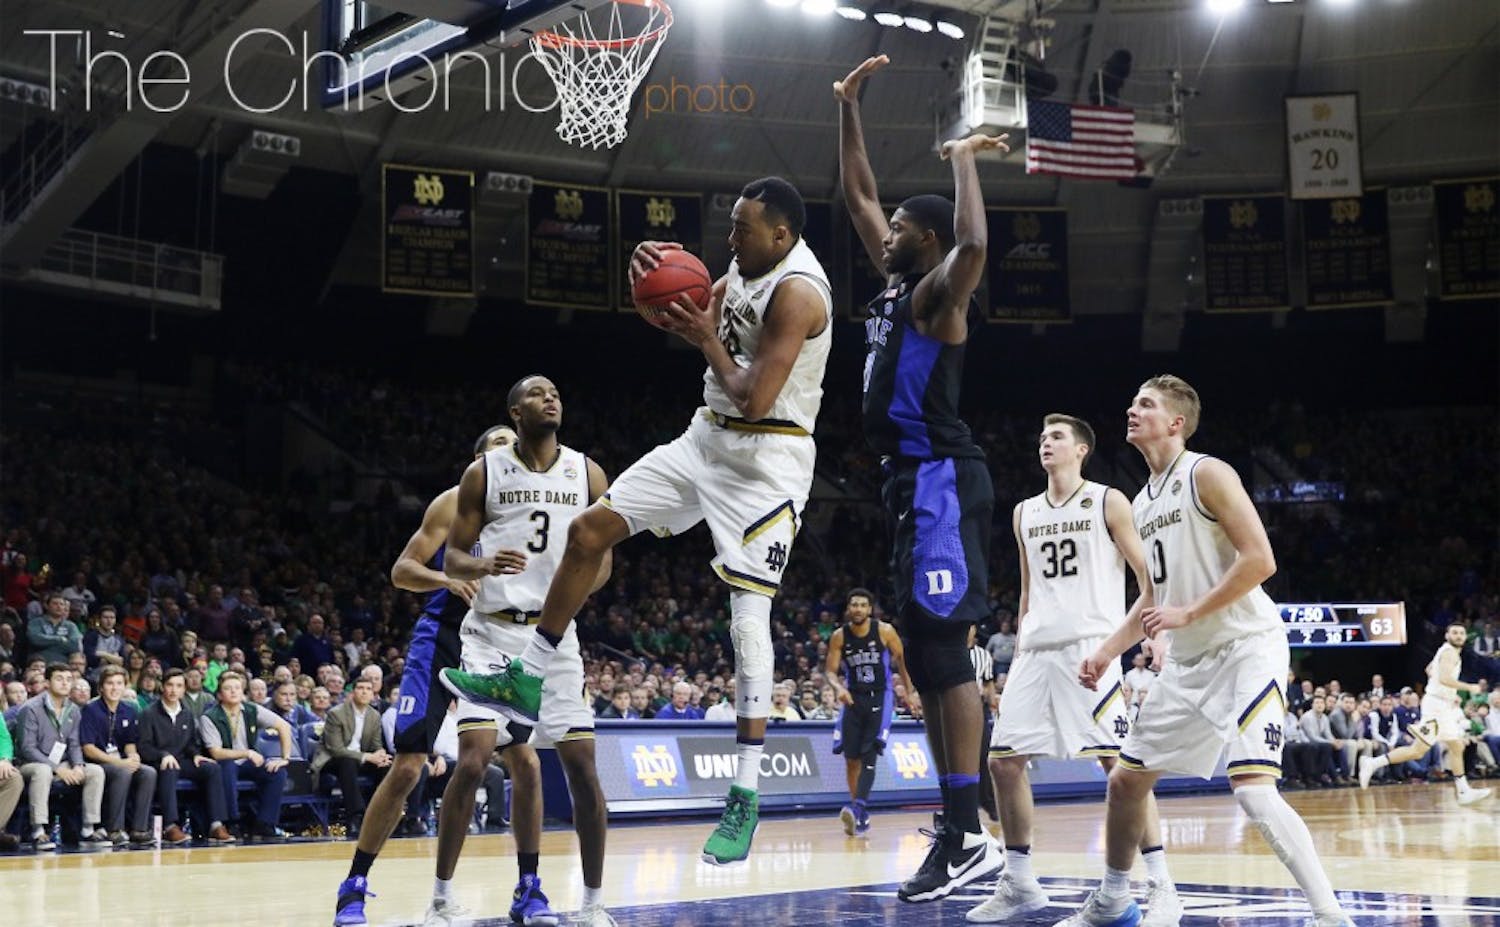 Notre Dame forward Bonzie Colson earned first-team All-ACC honors after keeping his team in the upper echelon of conference powers by gobbling up rebounds and using an array of post moves in the paint.&nbsp;